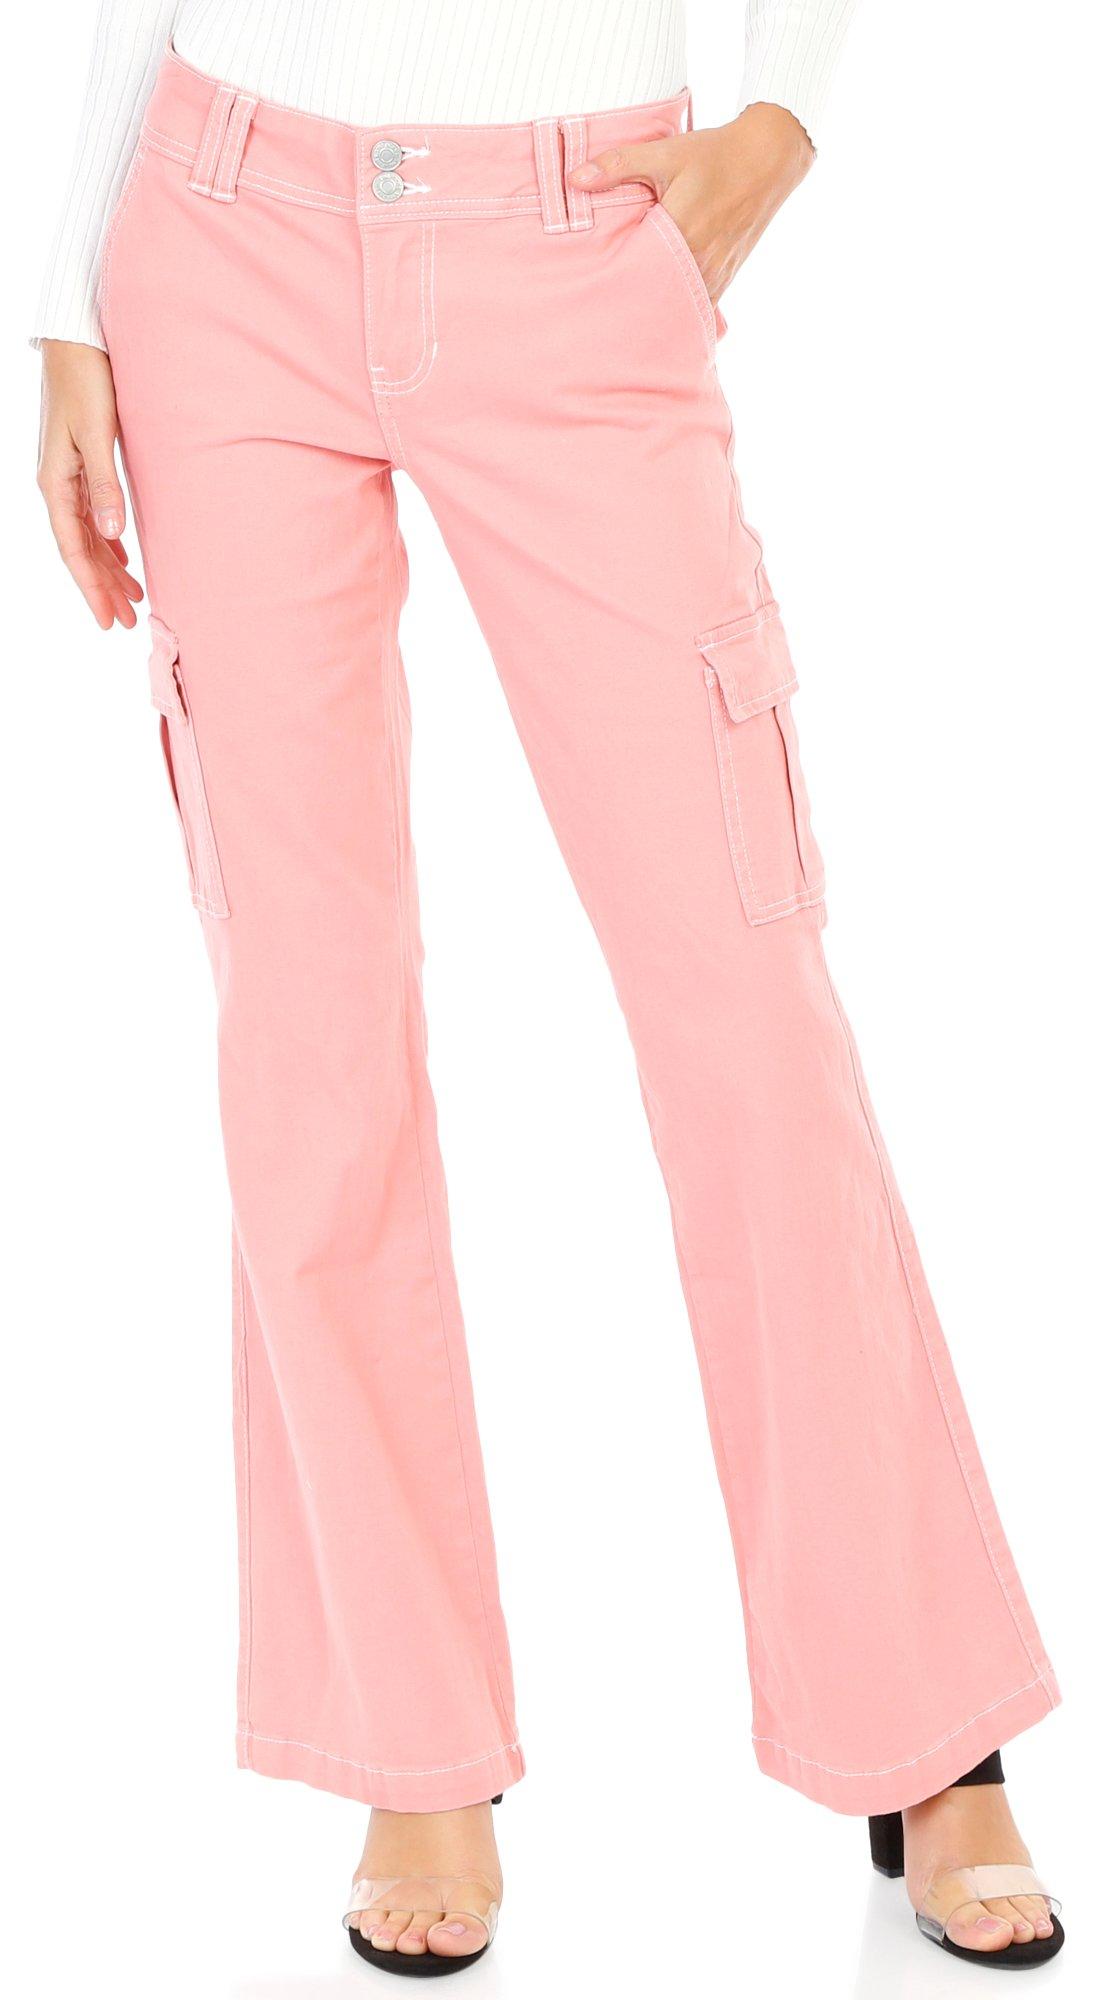 Juniors Solid Flare Jeans